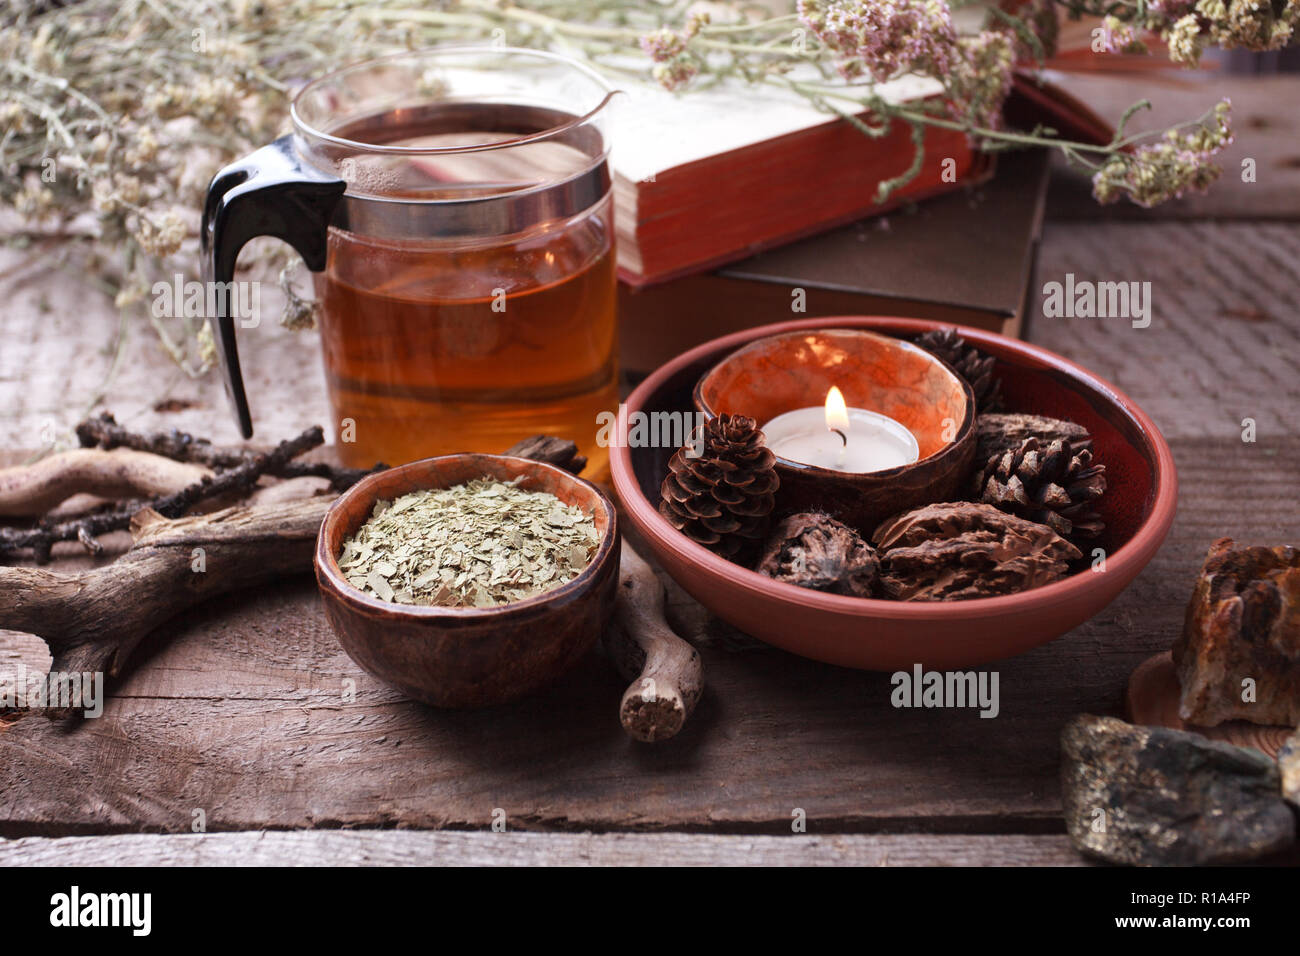 Healthy tea in glass teapot, dry herbs, plants and stones on wooden table. Homeopathy, alternative, occult ritual and herbal medicine concept, monochr Stock Photo